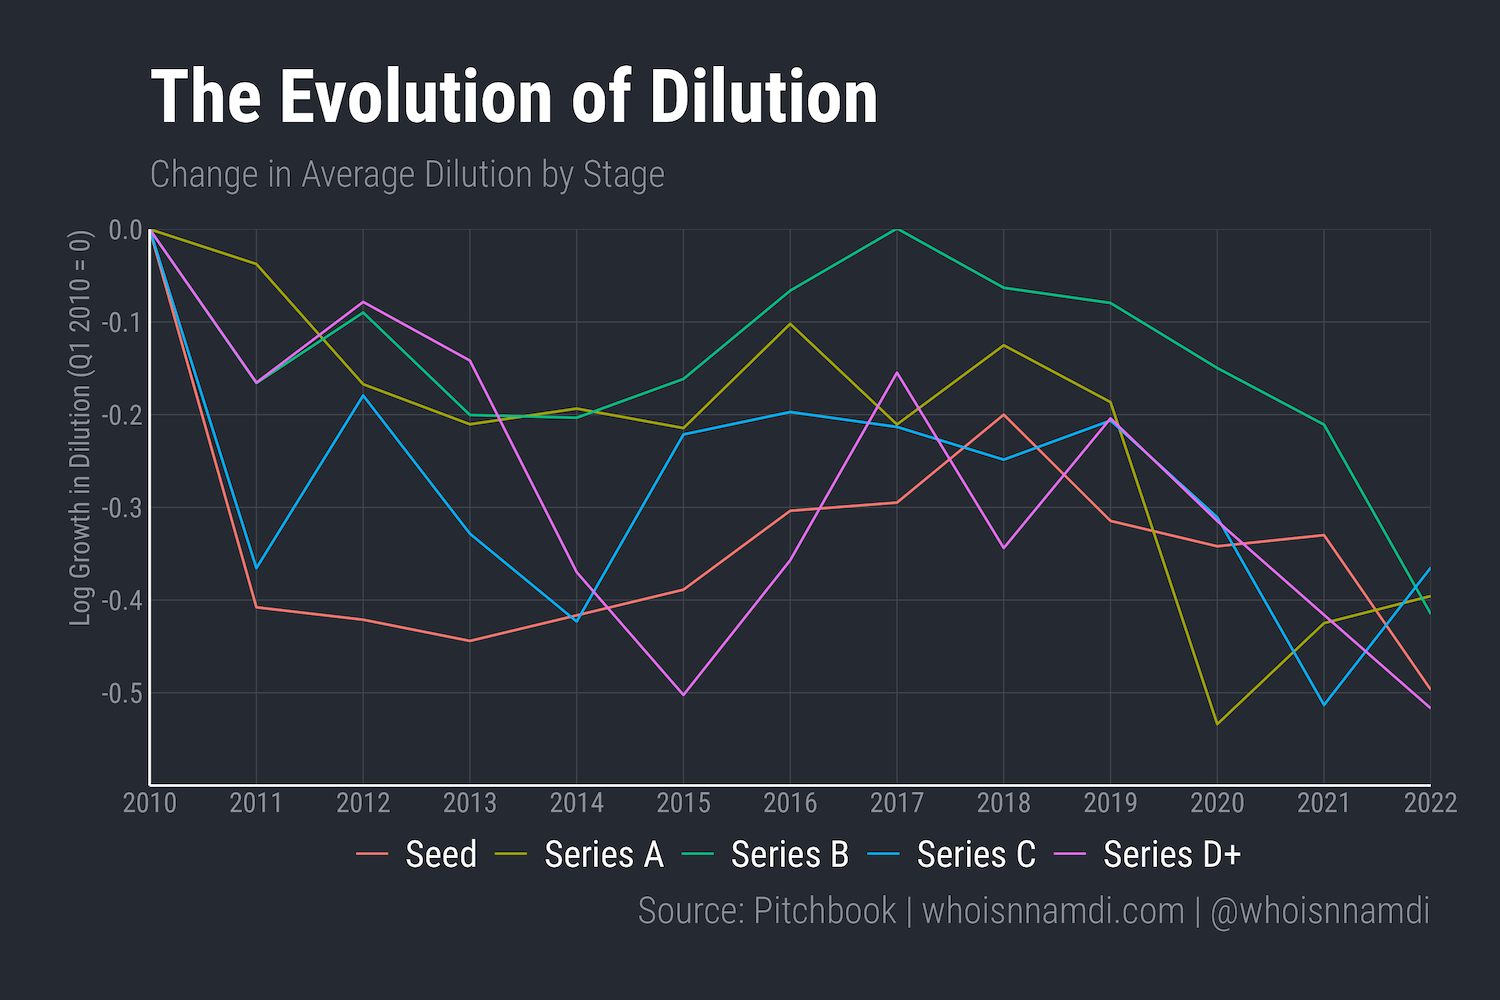 dilution